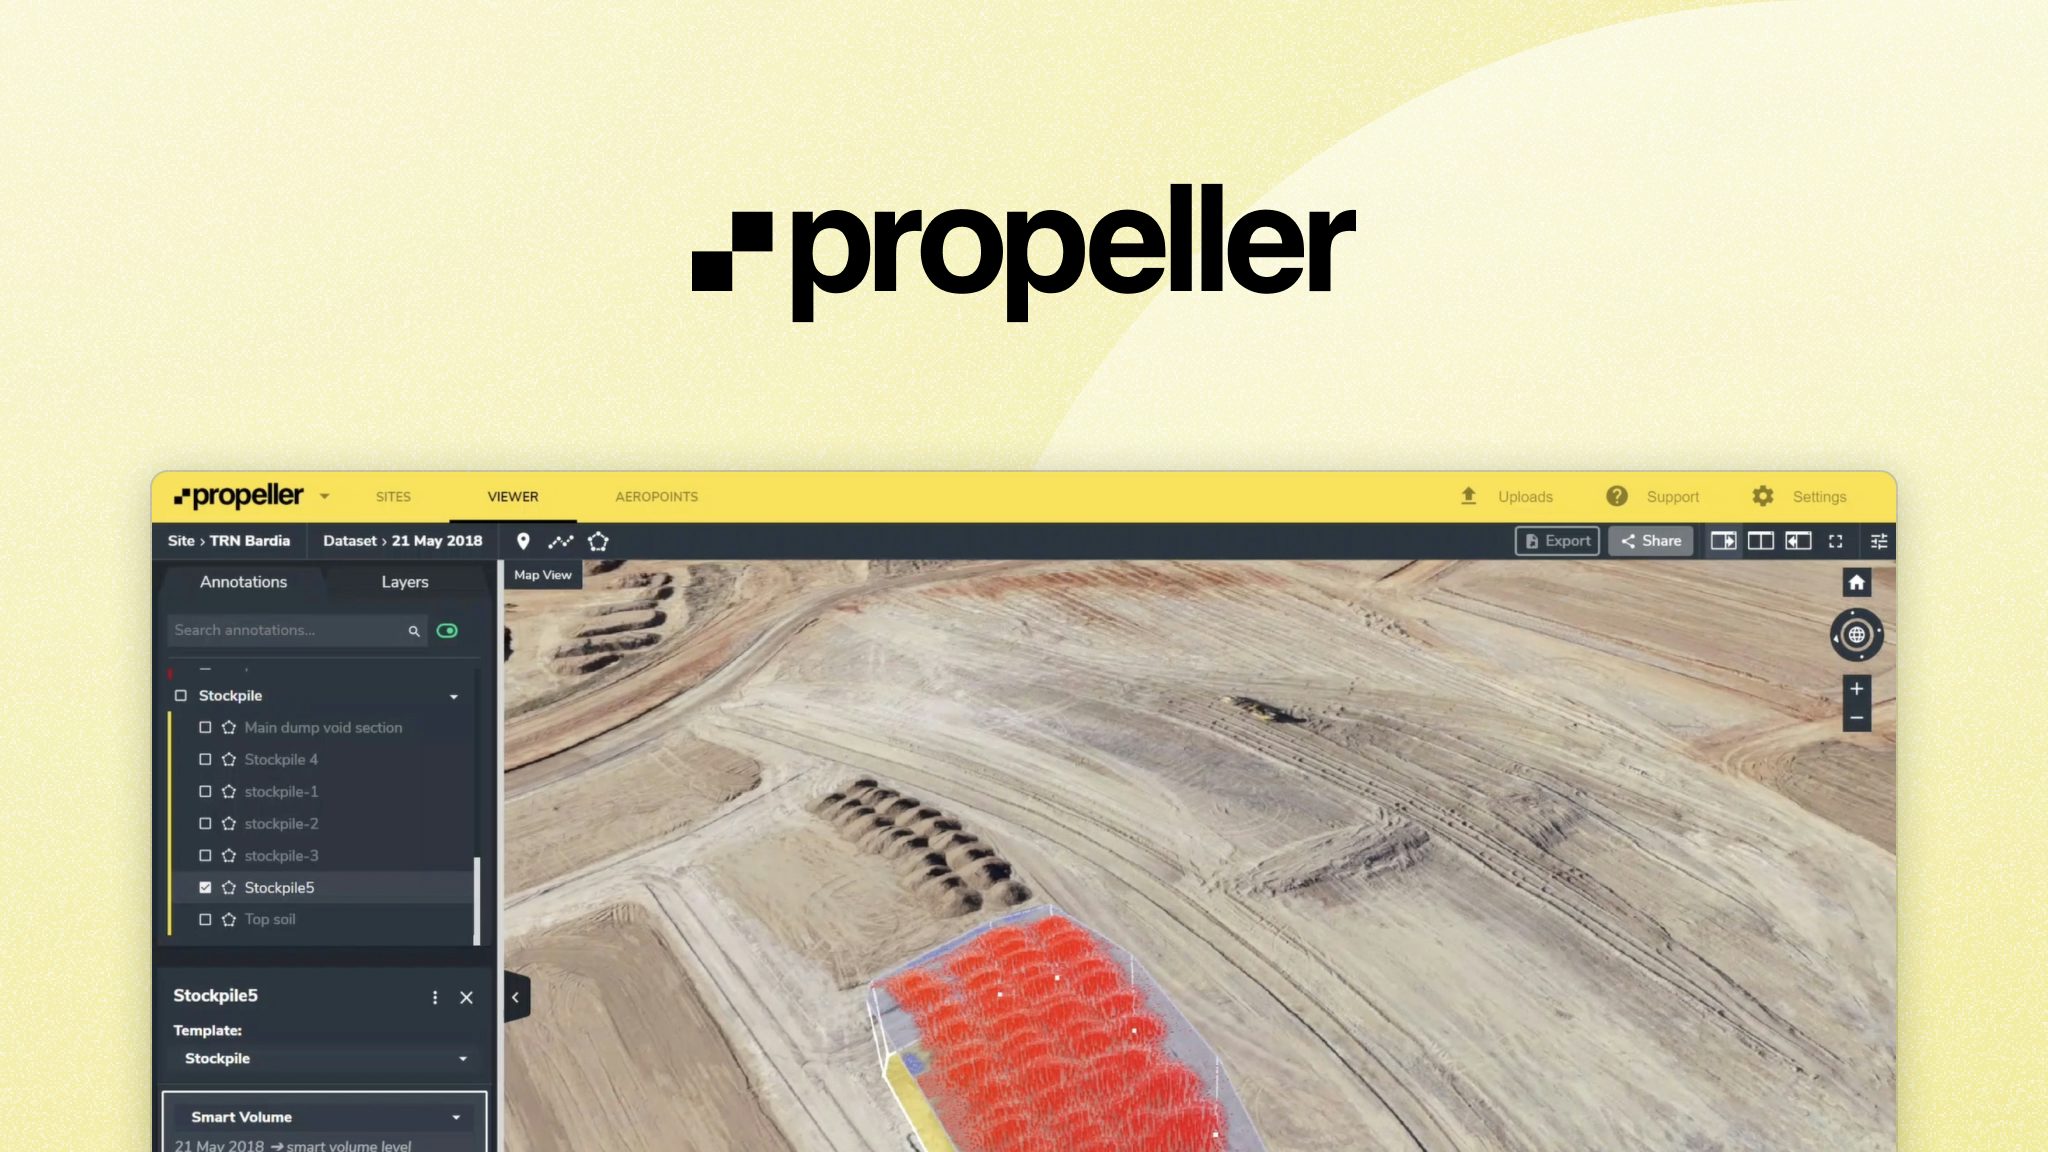 Propeller used Liveblocks to make their 3D maps collaborative in just days